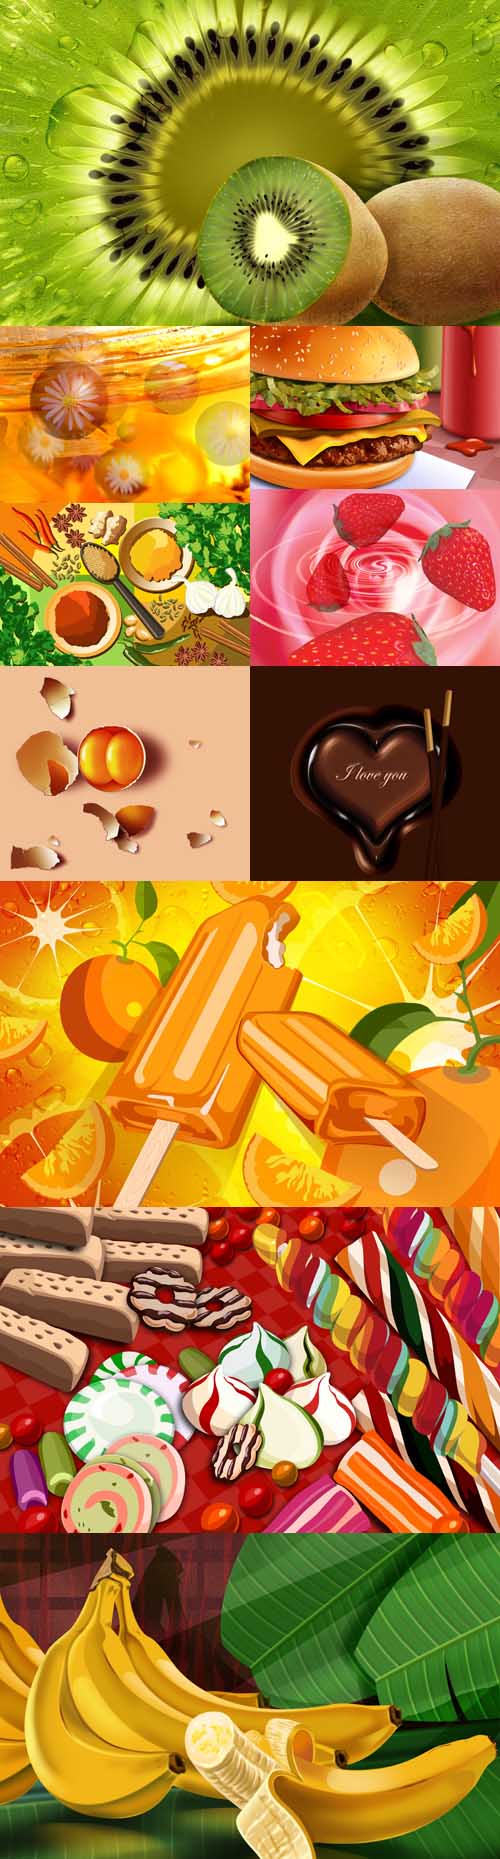 Collection of fruits and sweets Psd Sources